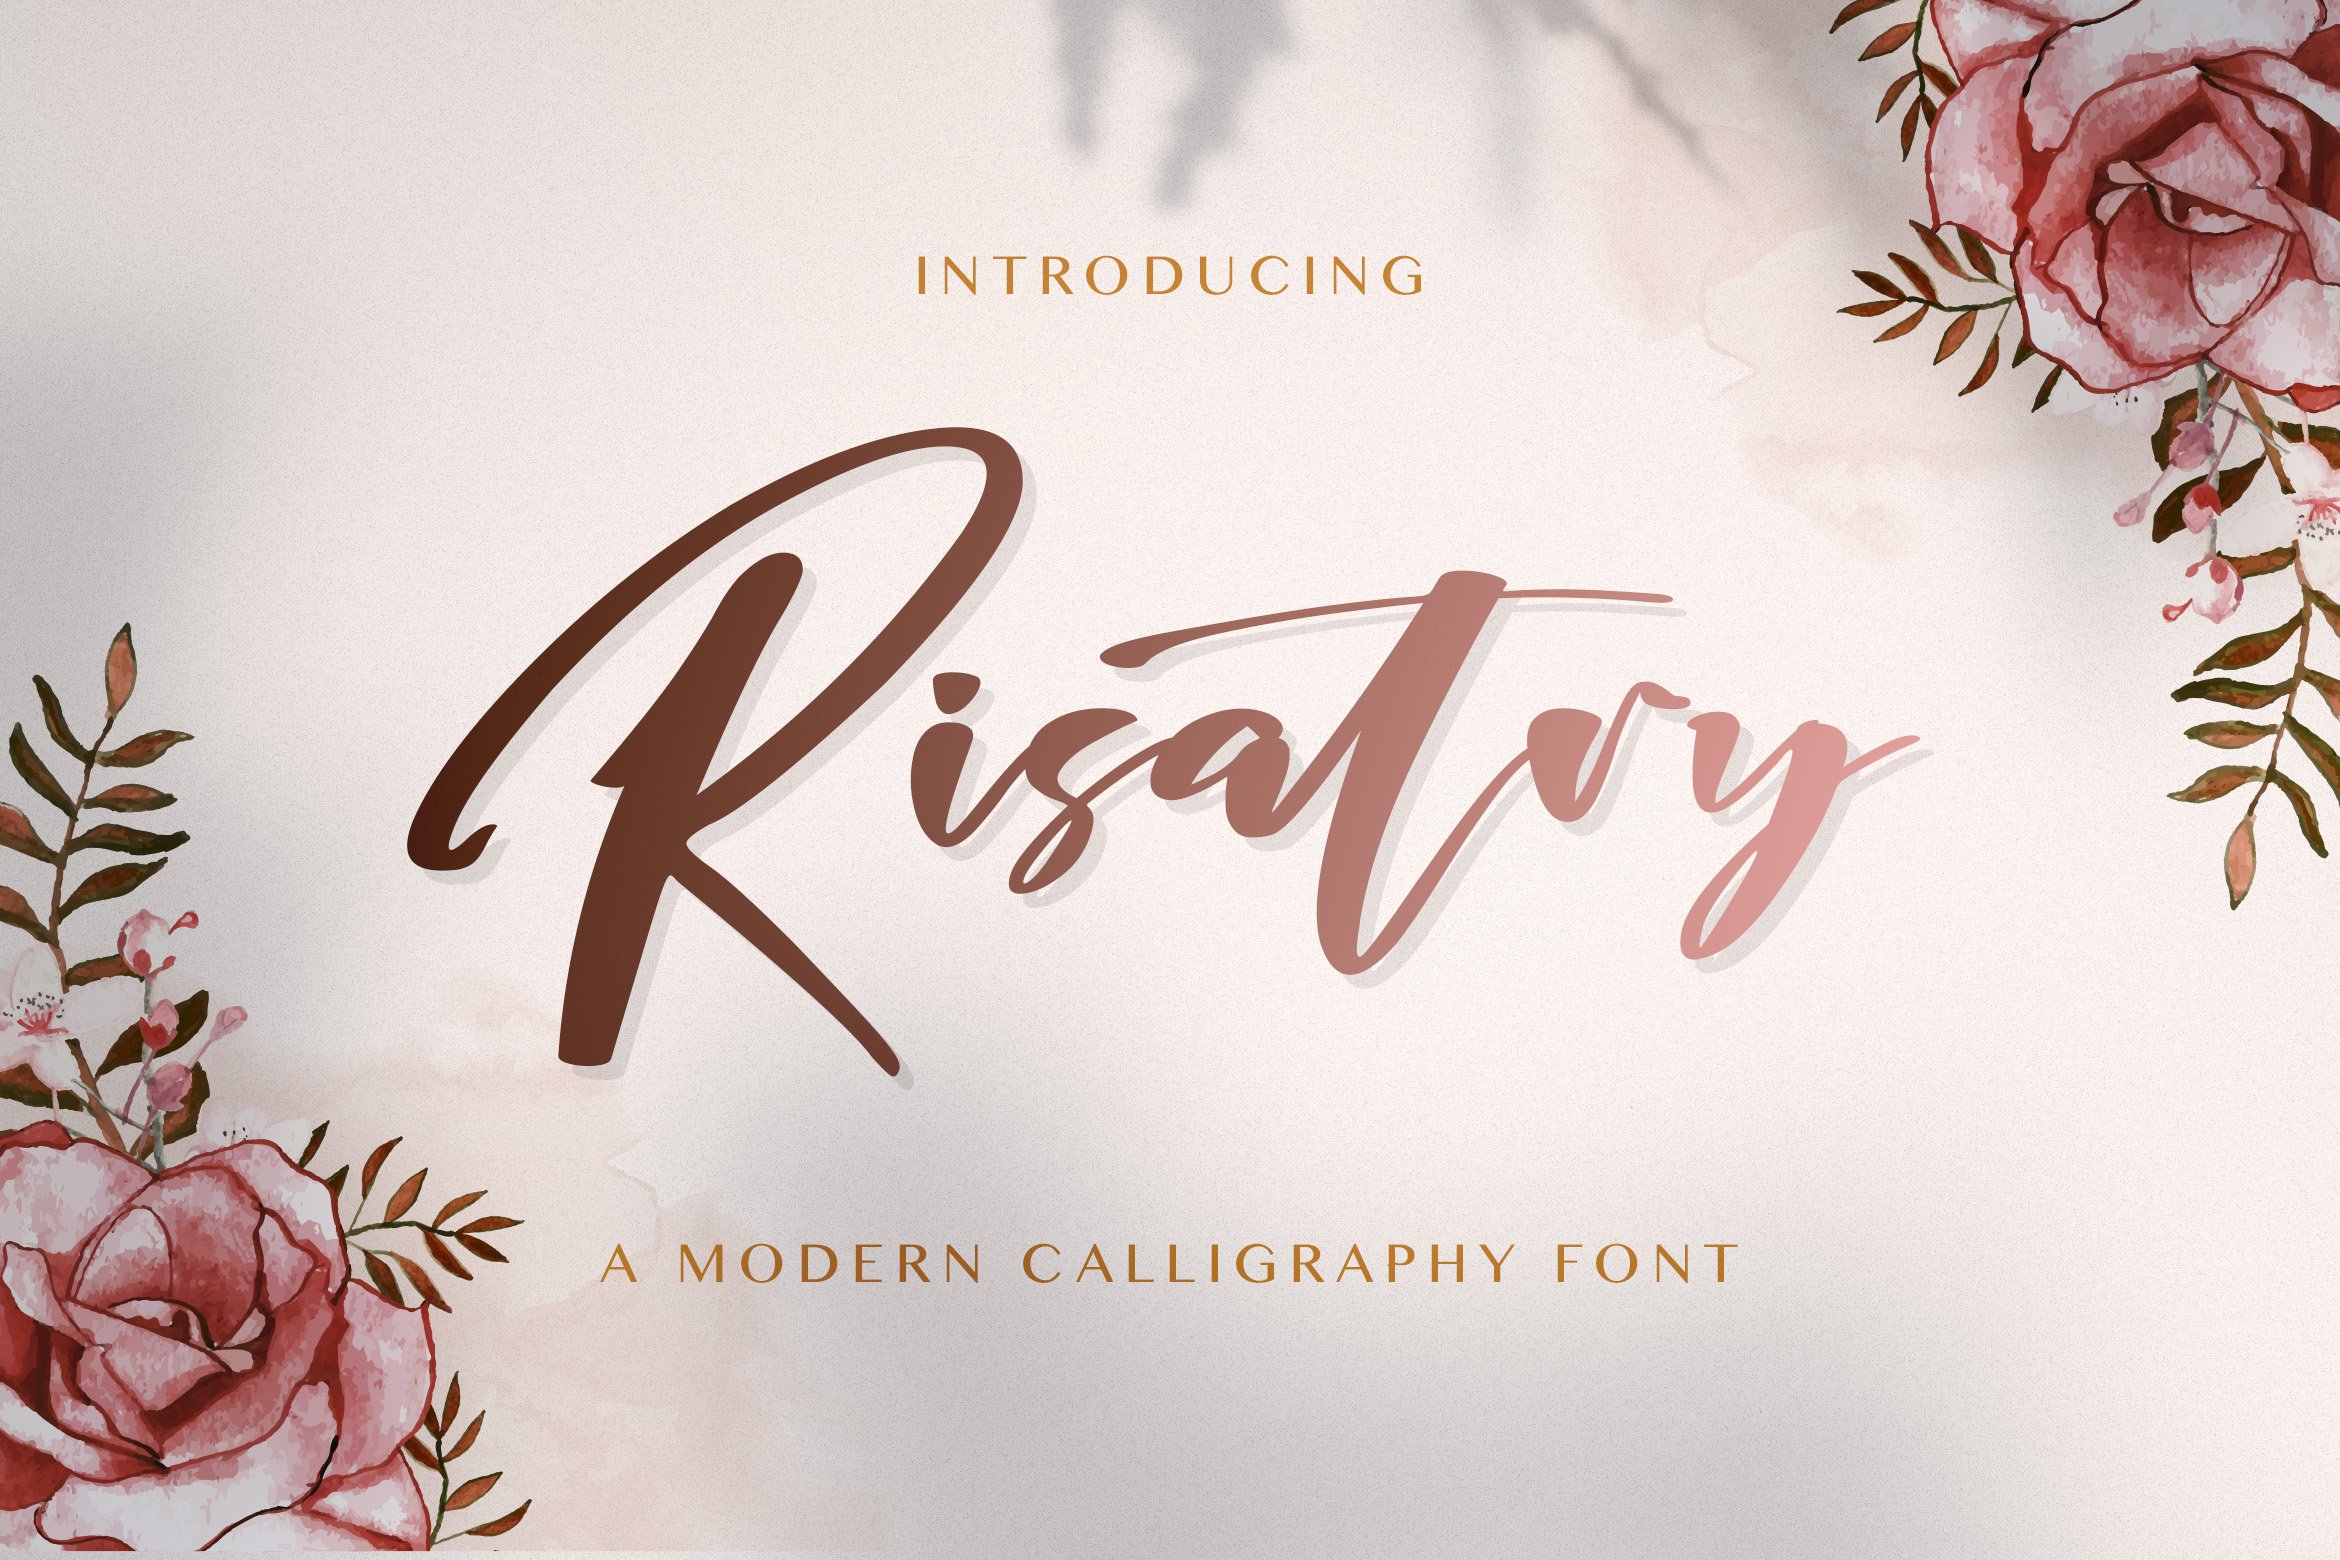 Risatry - Calligraphy Font cover image.